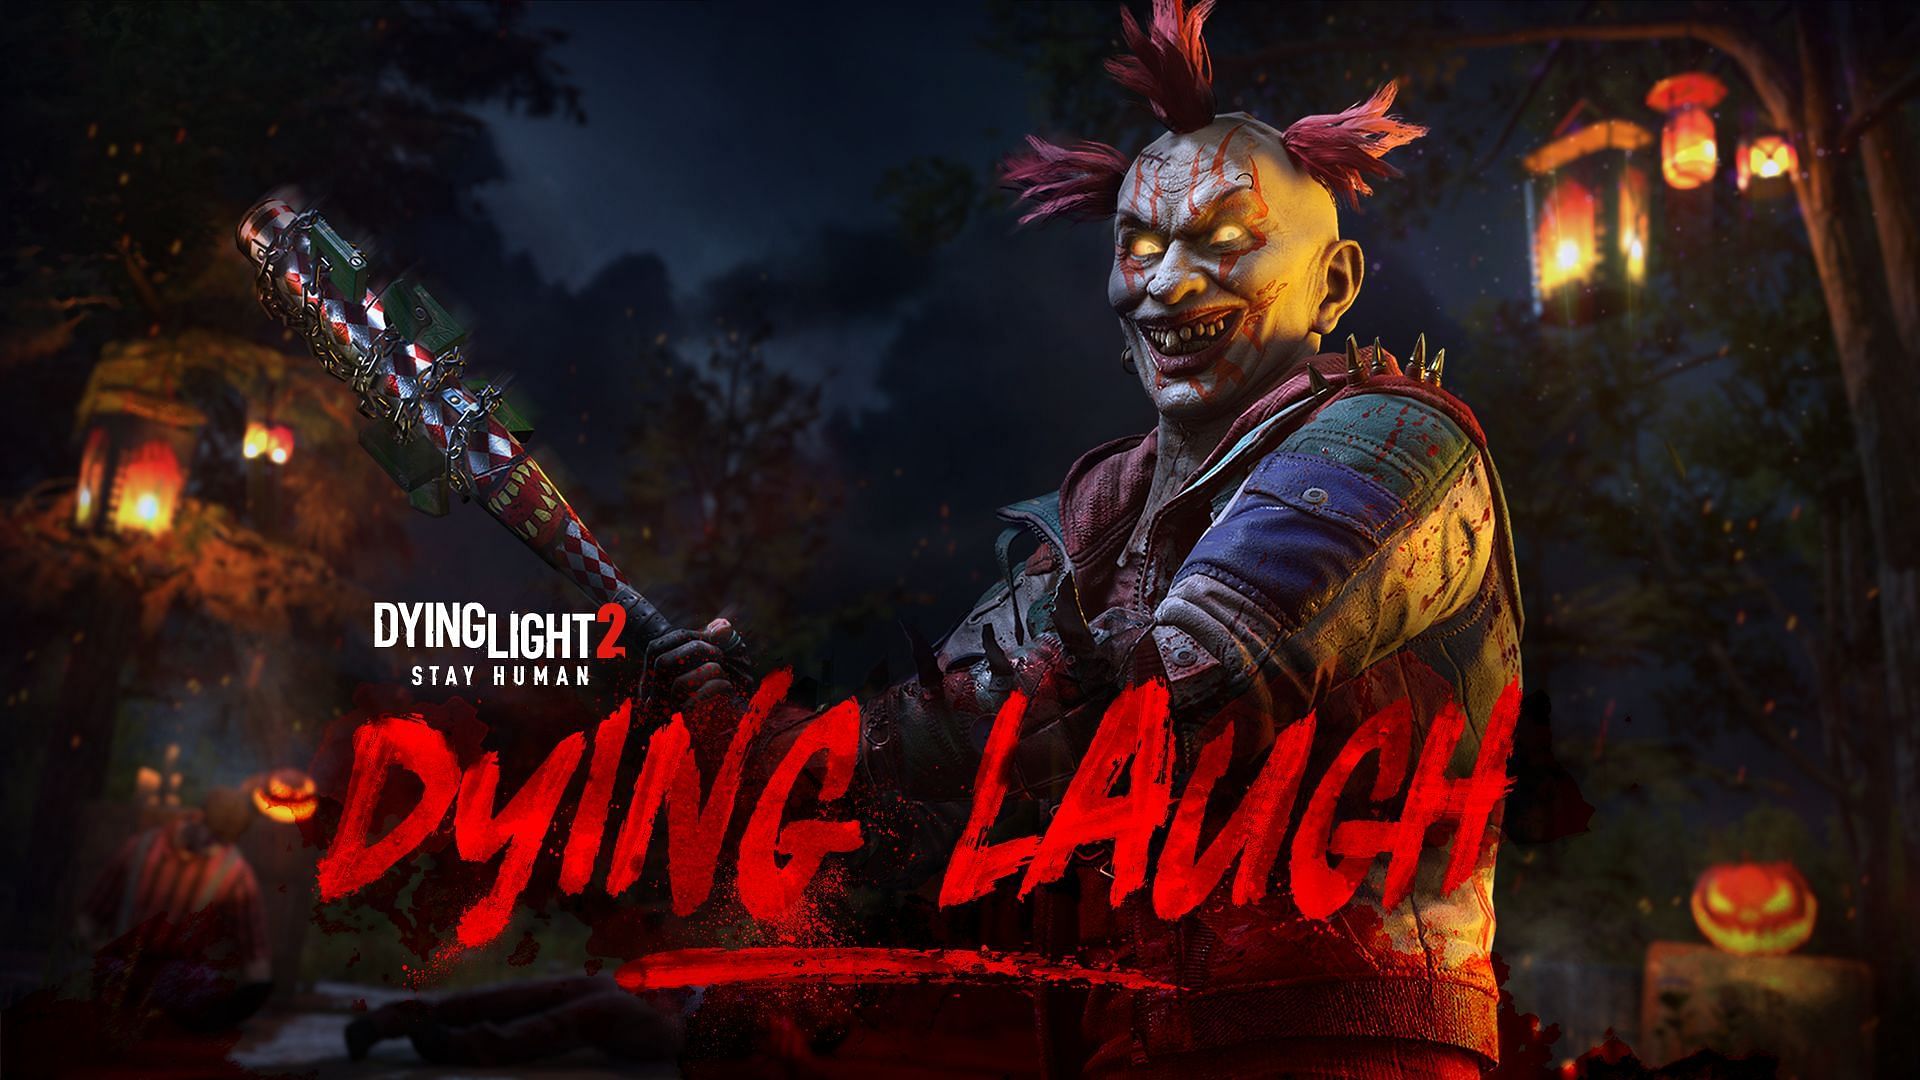 The Dying Laugh Bundle includes a new themed skin for both Aiden and his paraglider as well as a new weapon (Image via Techland)